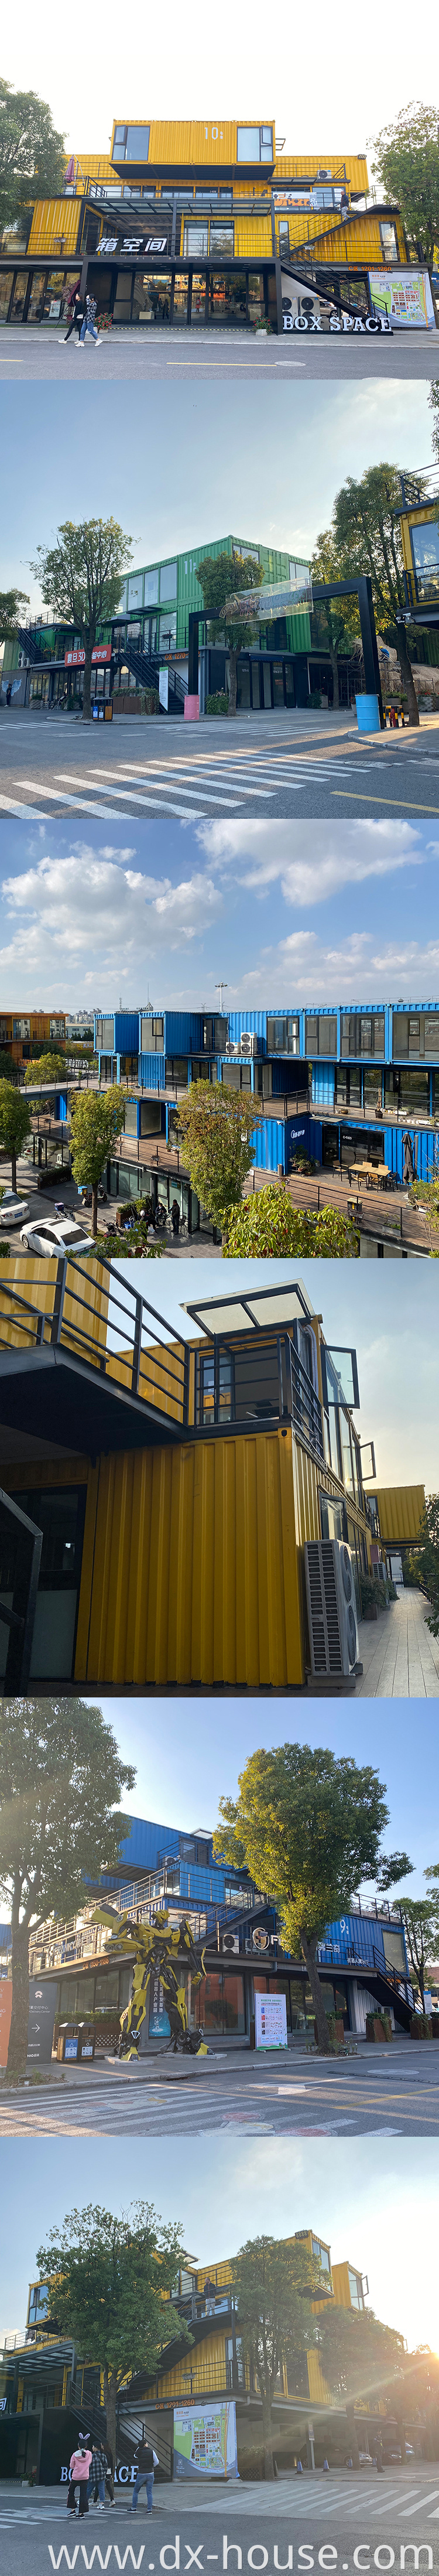 prefab shipping container homes